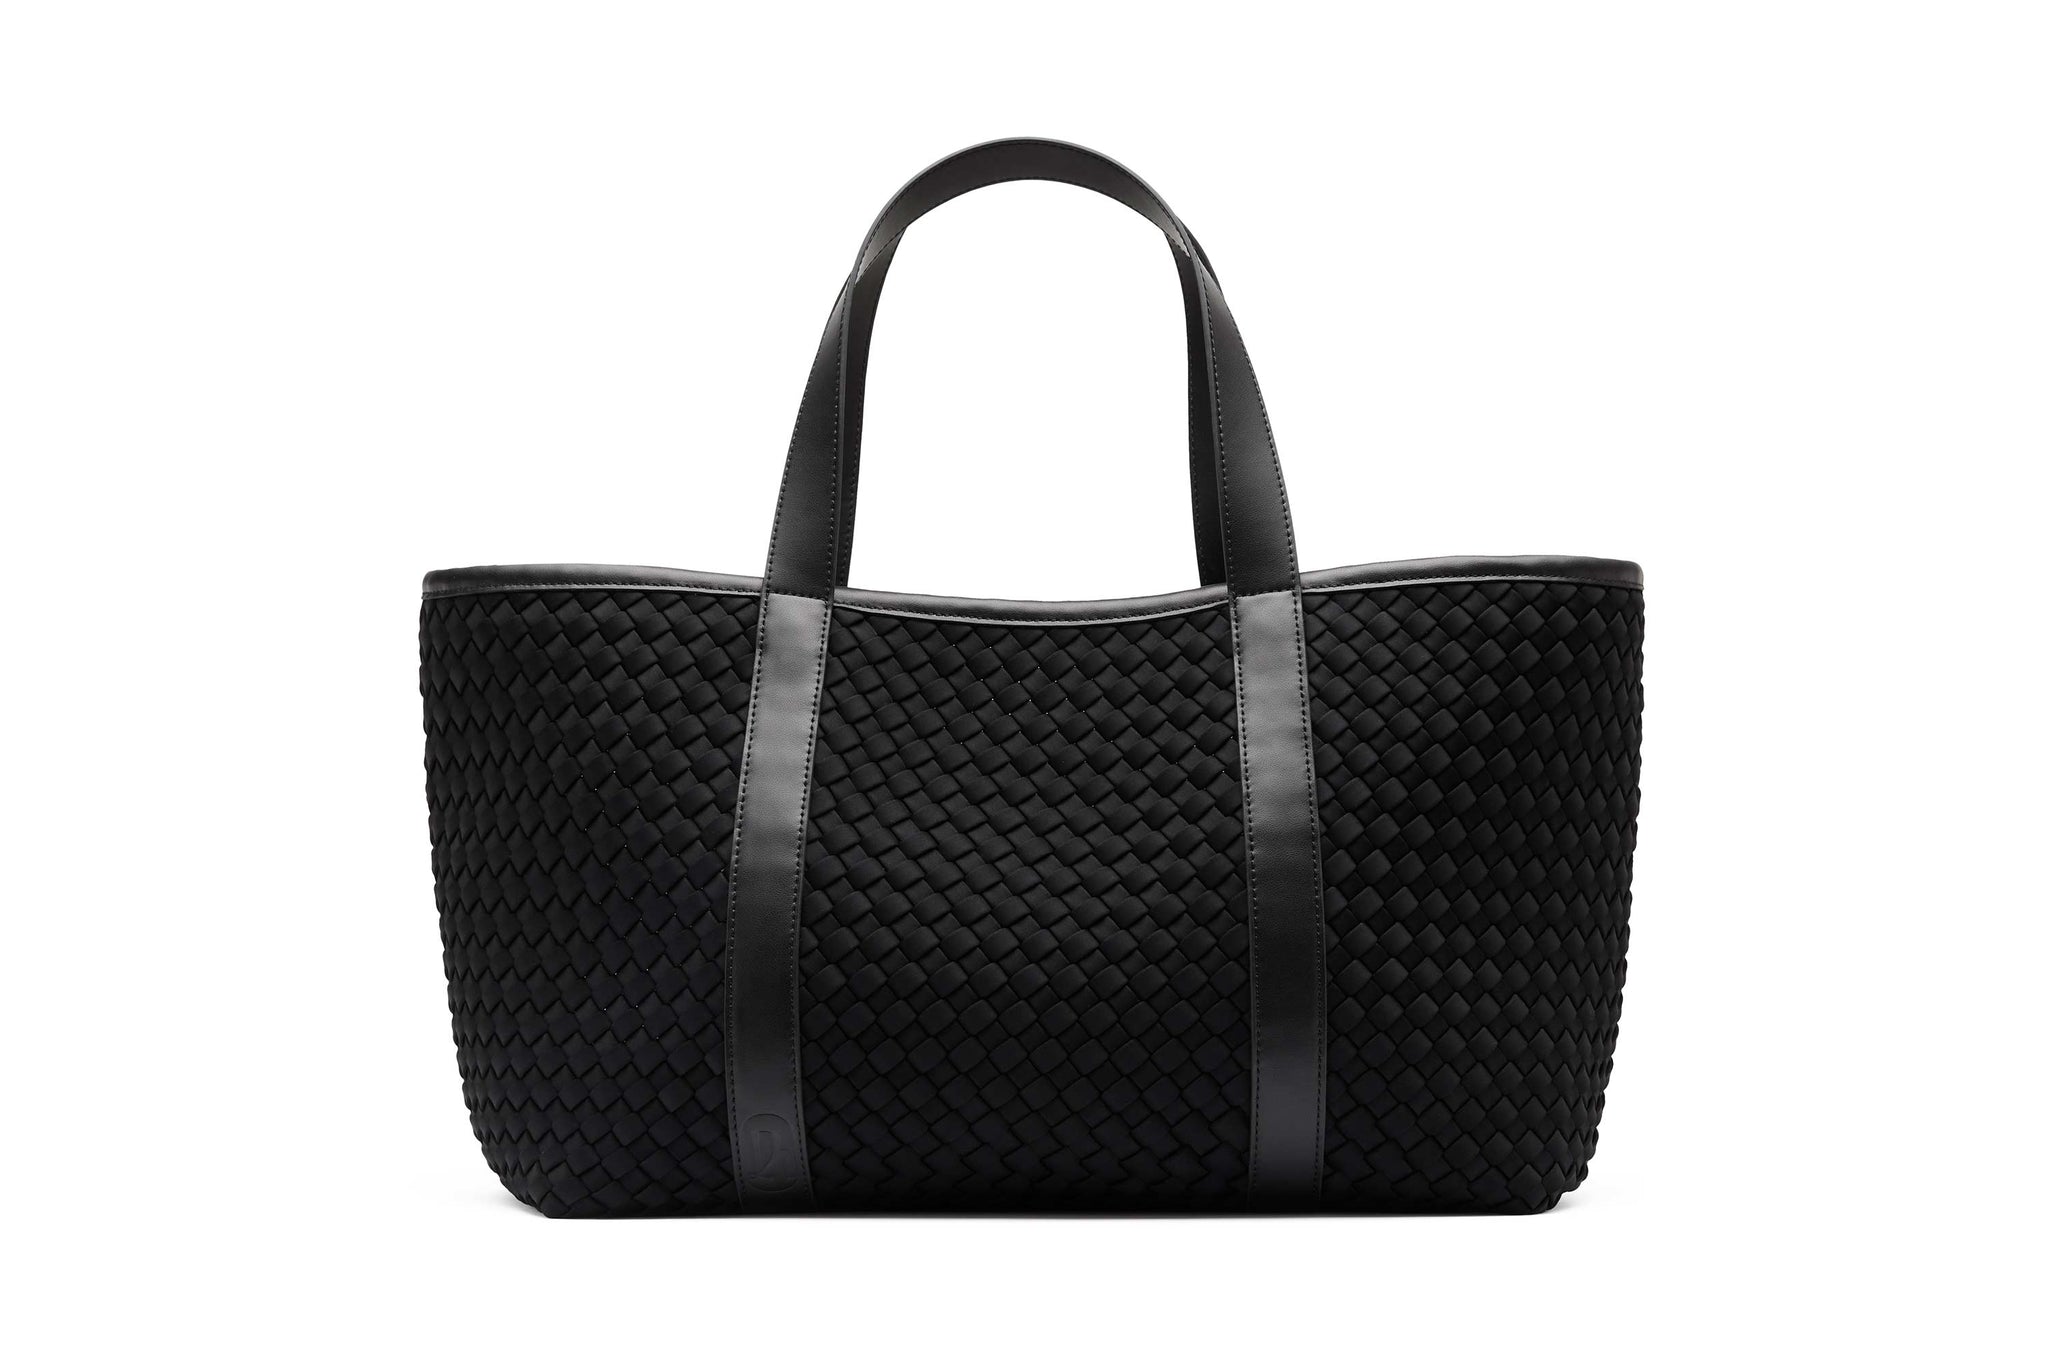 18.56 Rylan Uni-sex Black Woven Neoprene with Leather Carry-All Tote | EOFY Sale